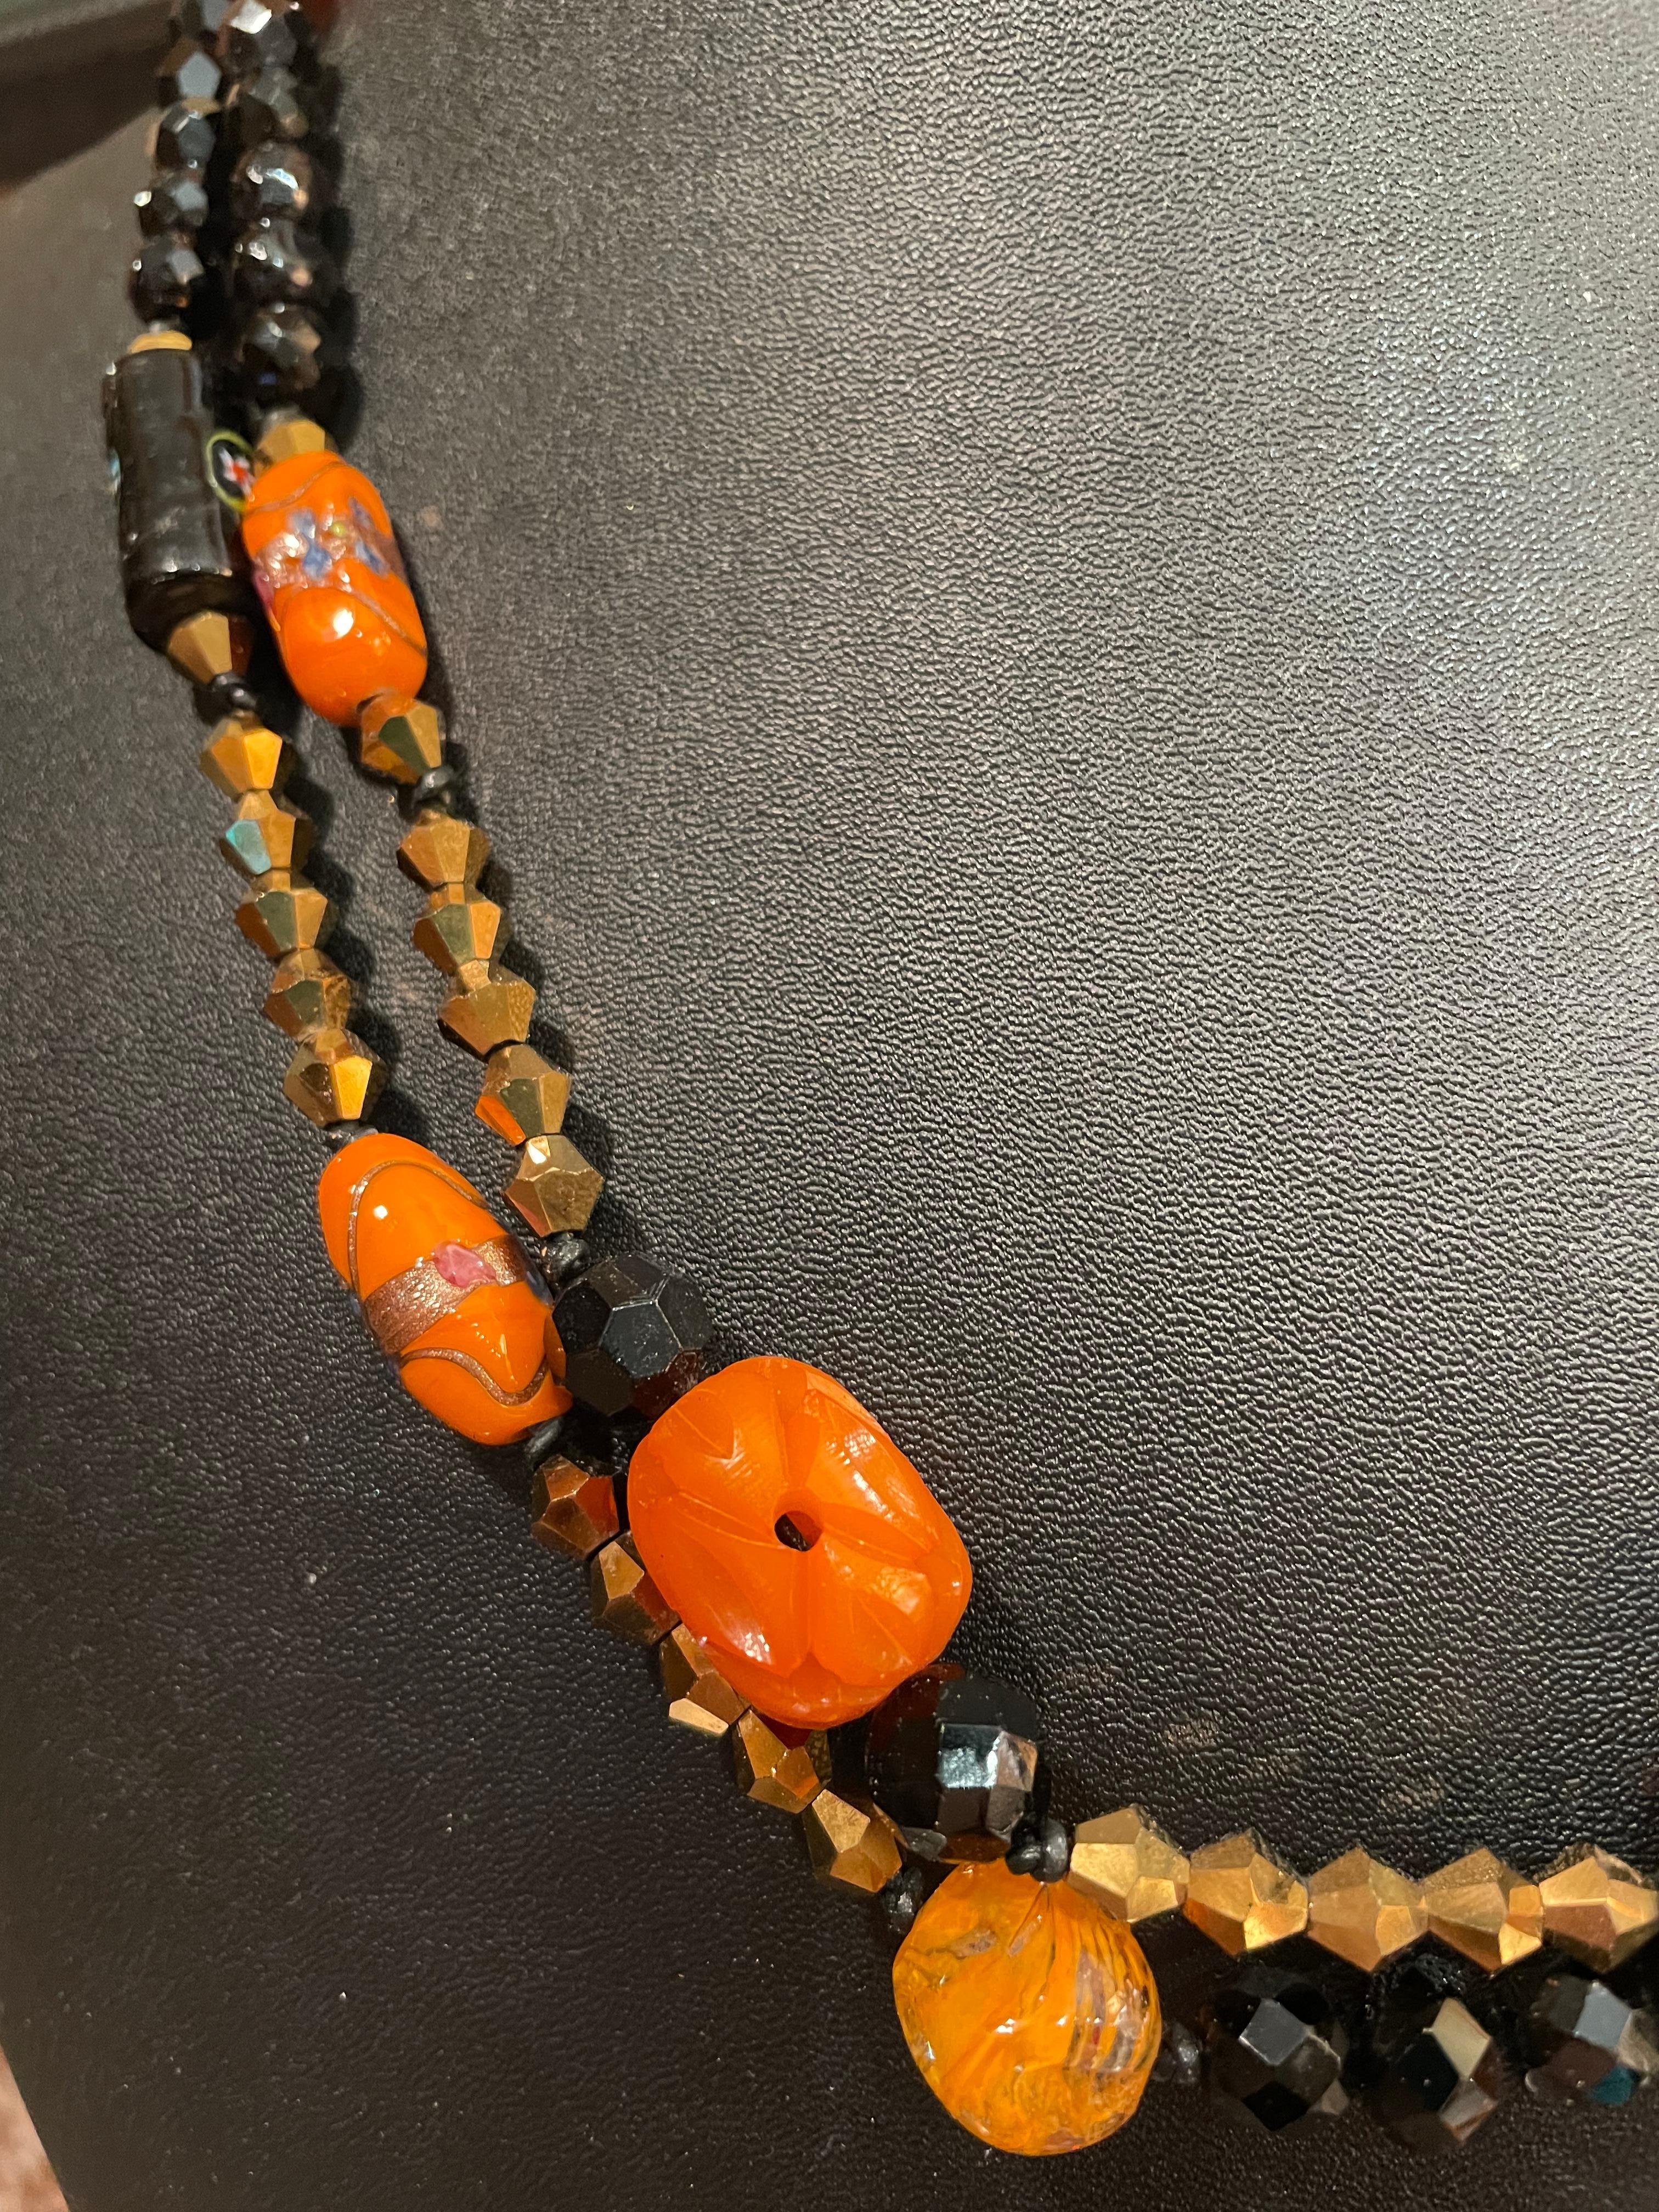 Lorraine’s Bijoux offers a one of a kind Vintage Murano glass beads, agates, Bakelite, and jet long strand necklace. This handmade, stunning,sparkly, gorgeous strand will be a welcome addition to any jewelry wardrobe.
The vintage Venetian wedding